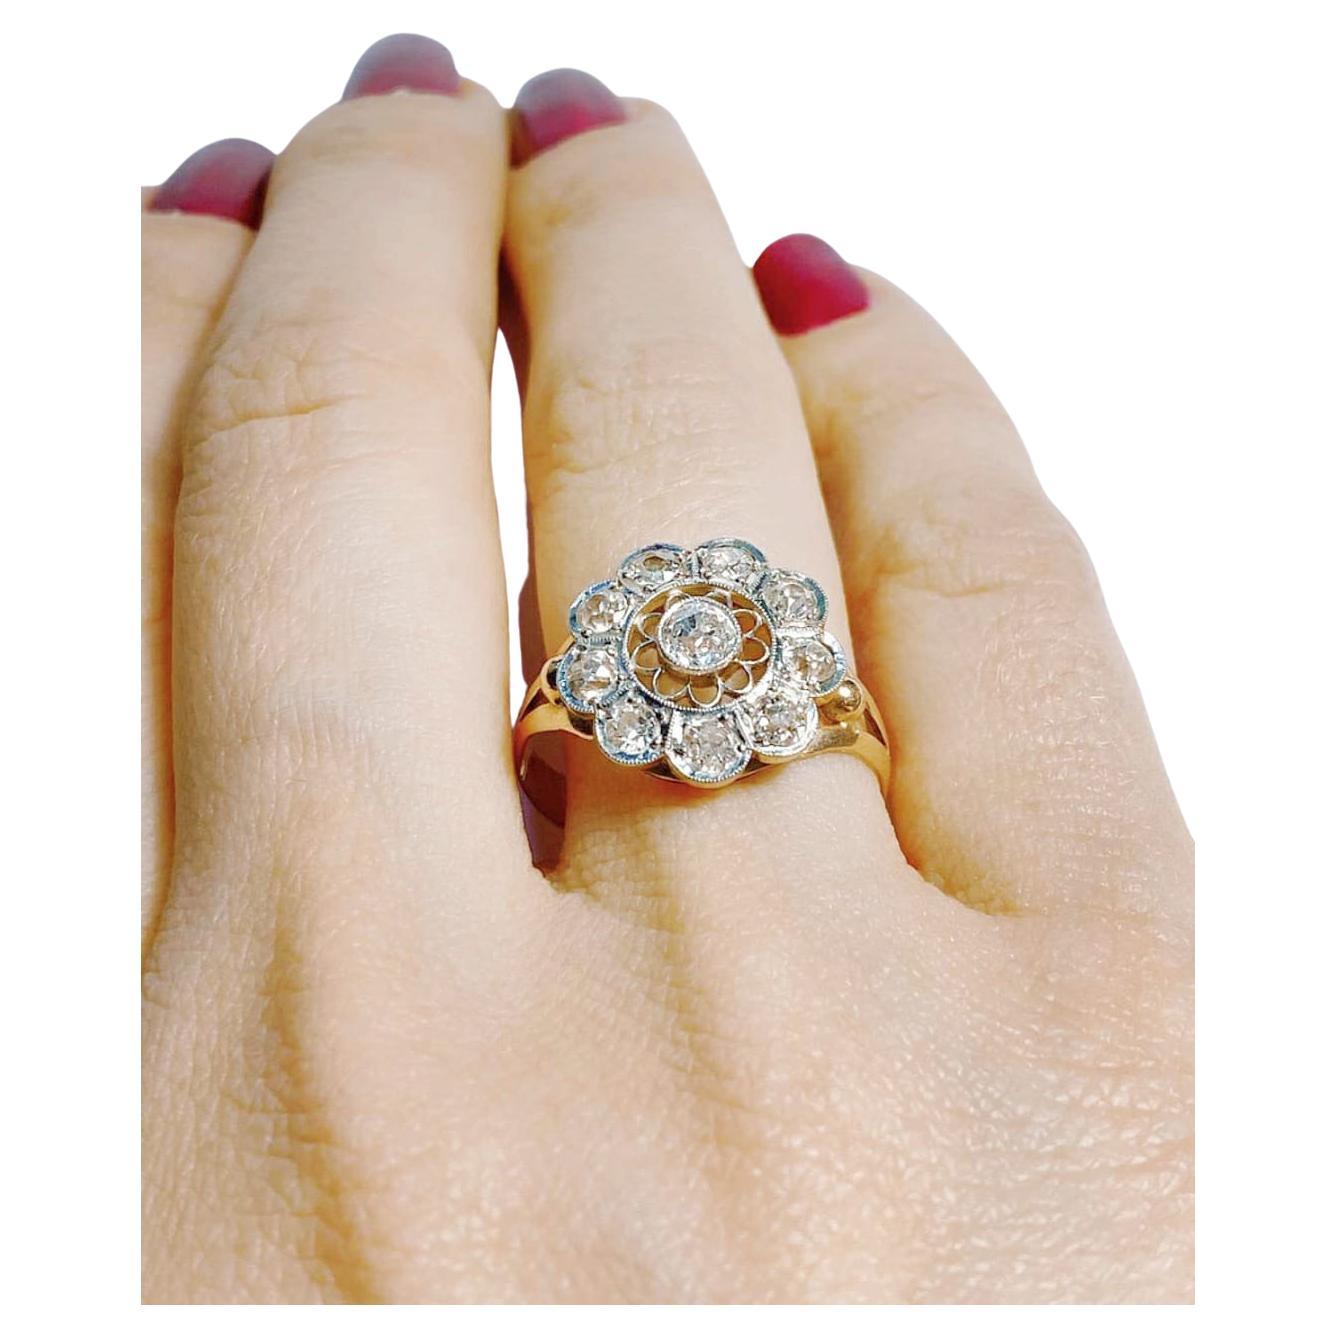 Antique old mine cut diamond 14k gold ring in a floral designe with estimate diamond weight of 1.10 carats in open work style ring was made in moscow 1899.c during the imperial russian era hall marked 56 imperial russian gold standard and old moscow